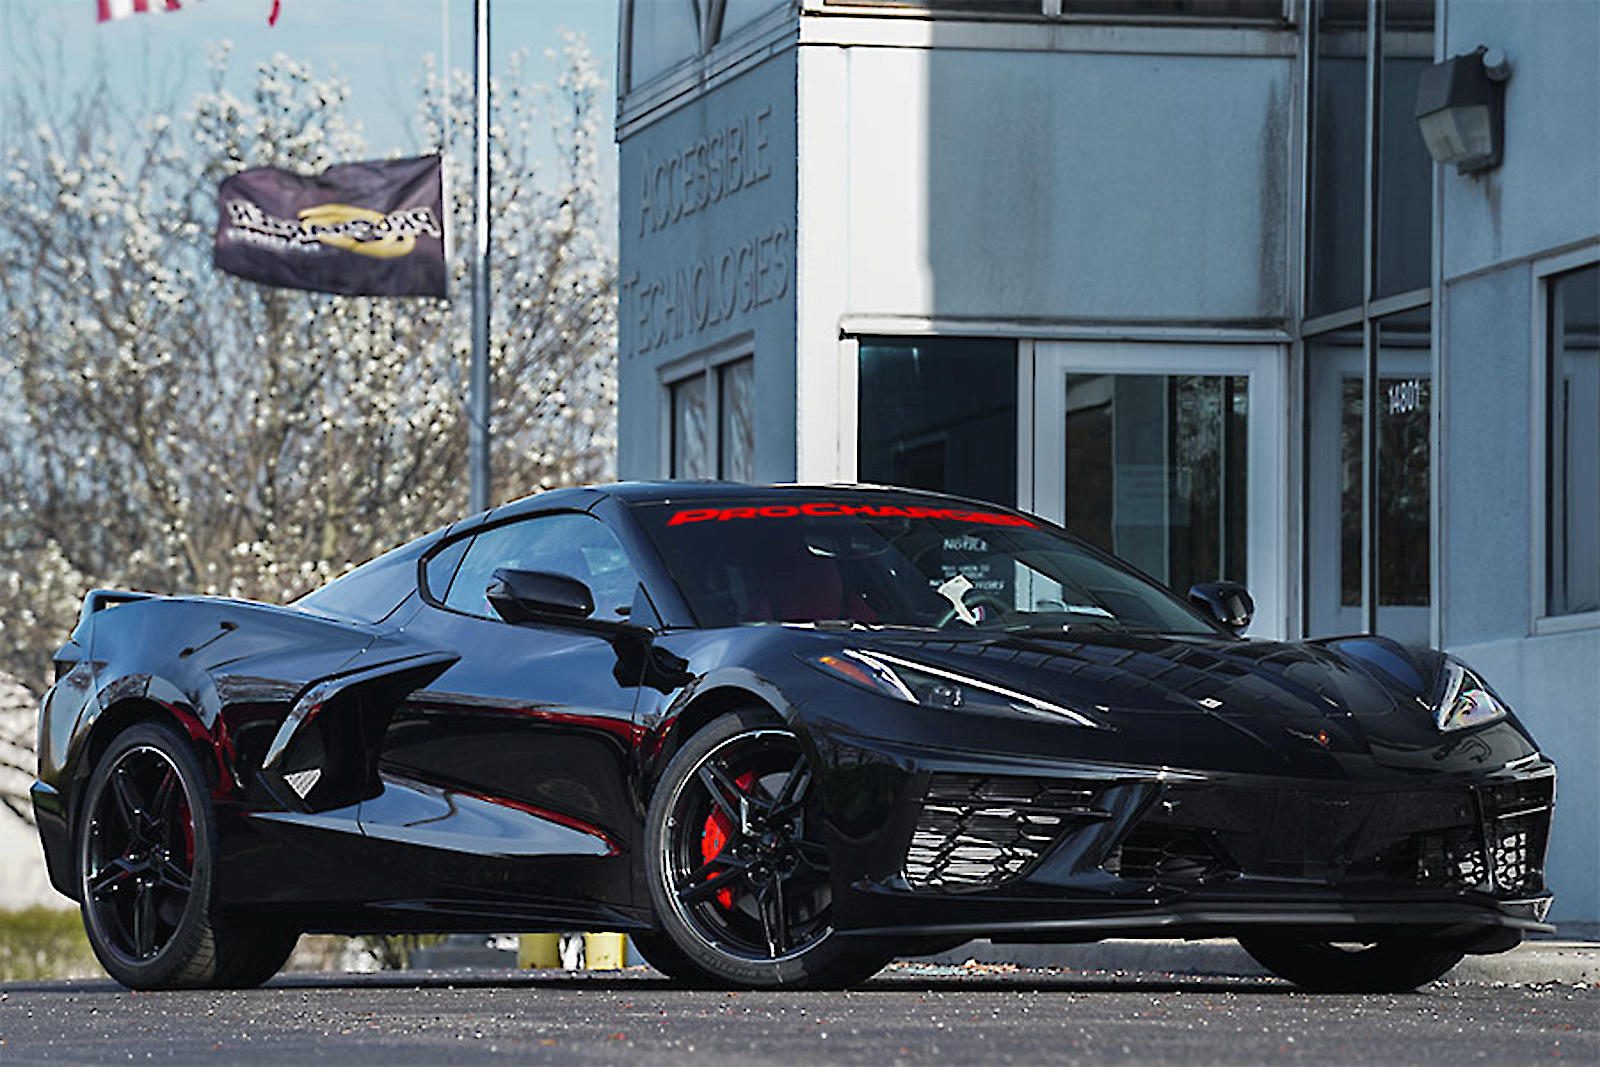 Get Ready For A Supercharged C8 Corvette With Way More Power.